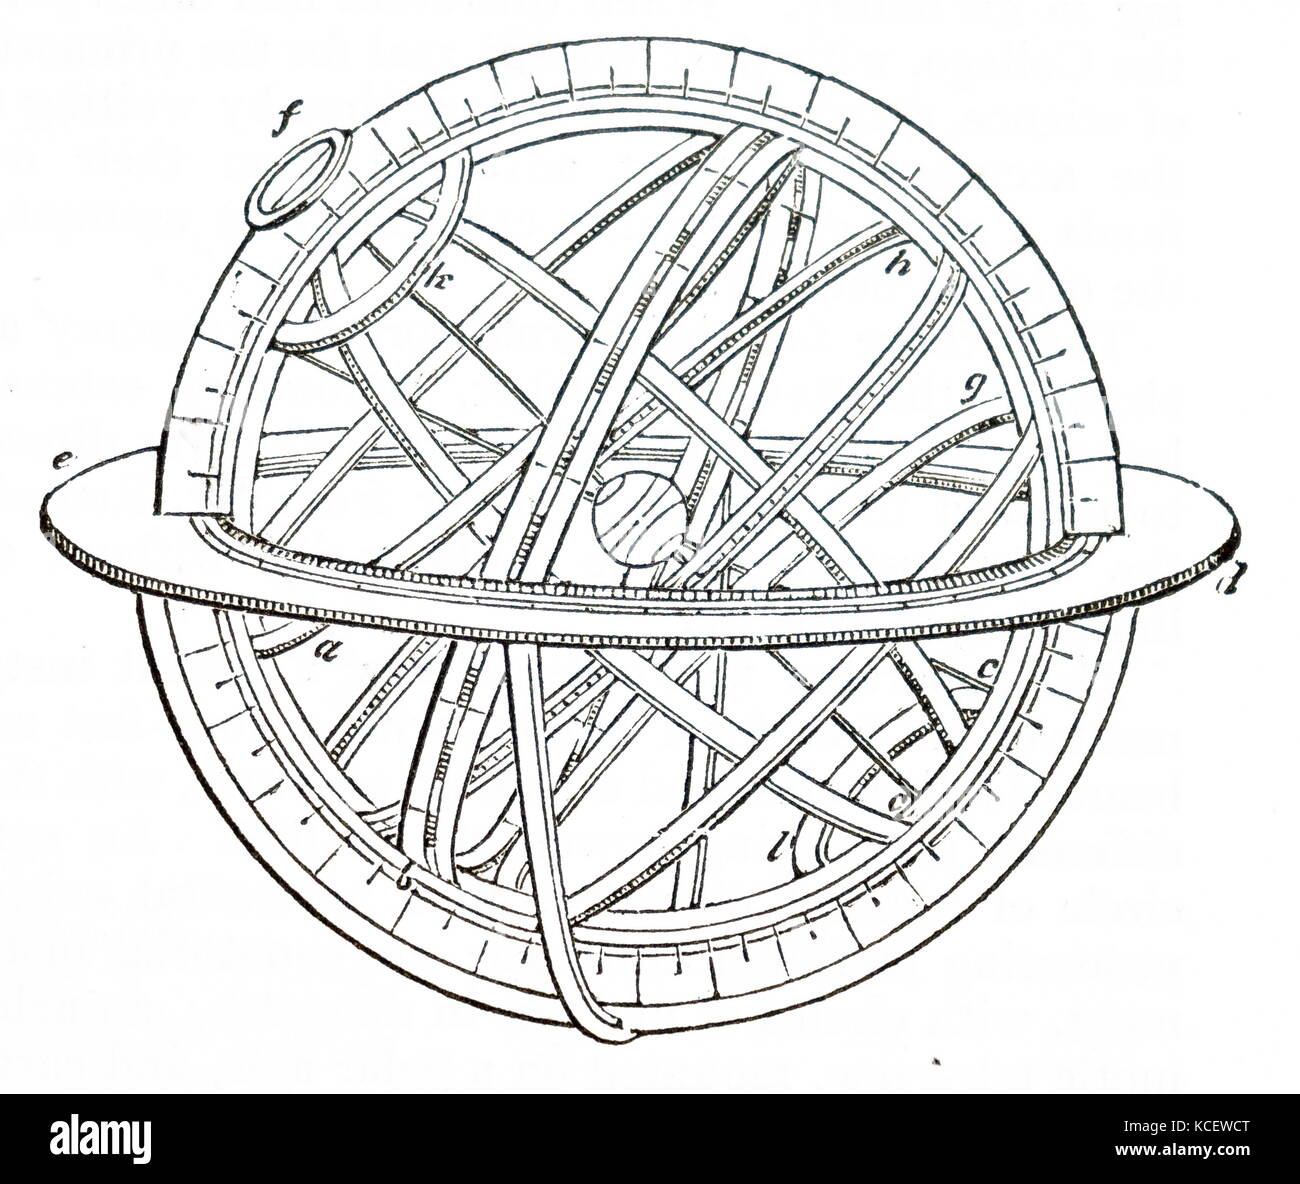 Illustration depicting an armillary sphere. An armillary sphere is a model of objects in the sky consisting of a spherical framework of rings, centred on Earth or the Sun, that represent lines of celestial longitude and latitude and other astronomically important features such as the ecliptic. Dated 16th Century Stock Photo